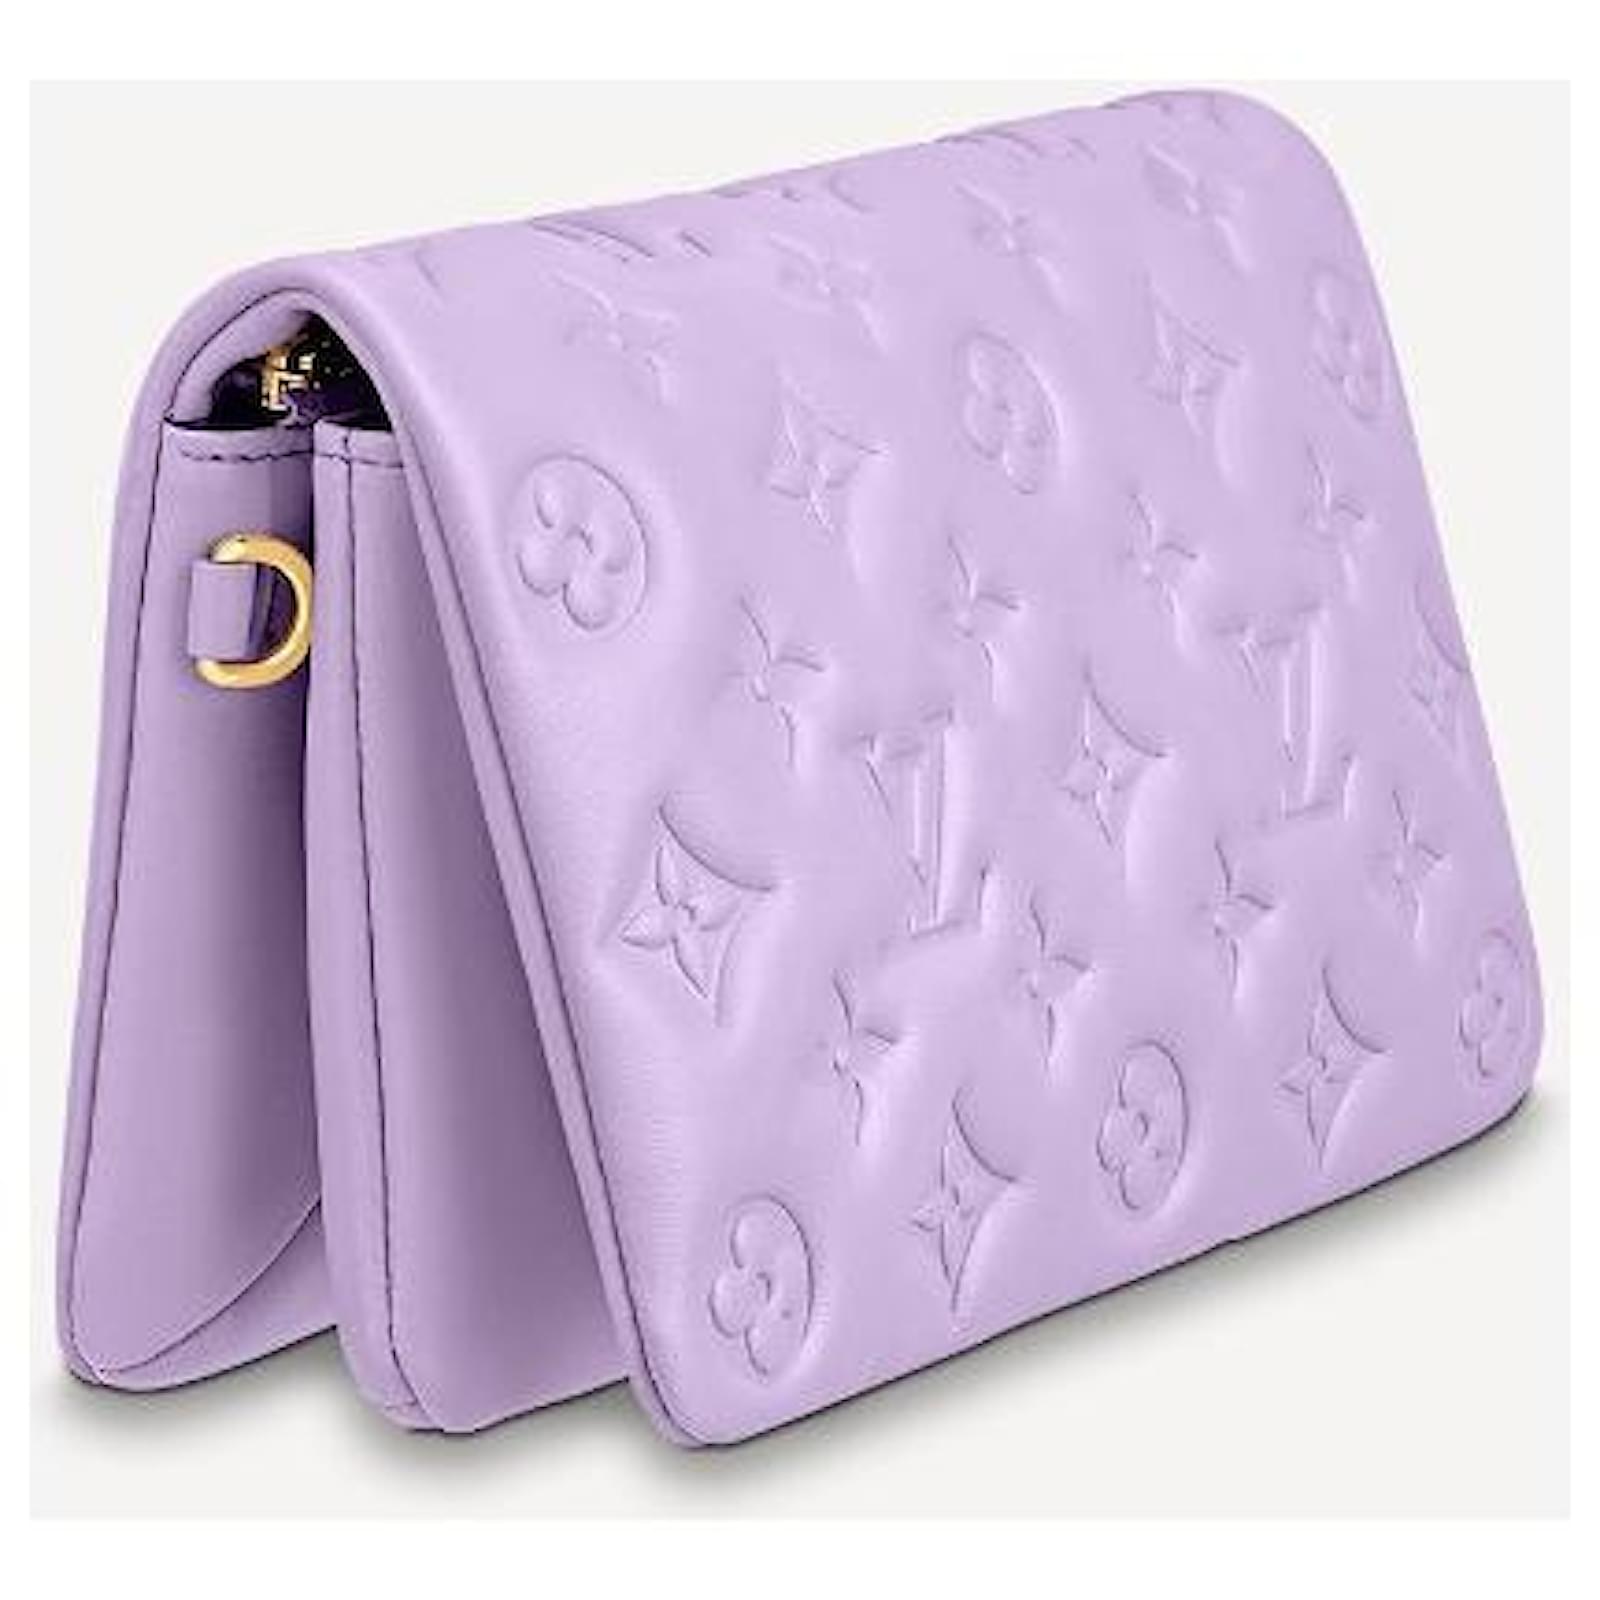 Louis Vuitton Coussin Pochette Pink Purple Monogram Embossed Leather Bag  New Tag